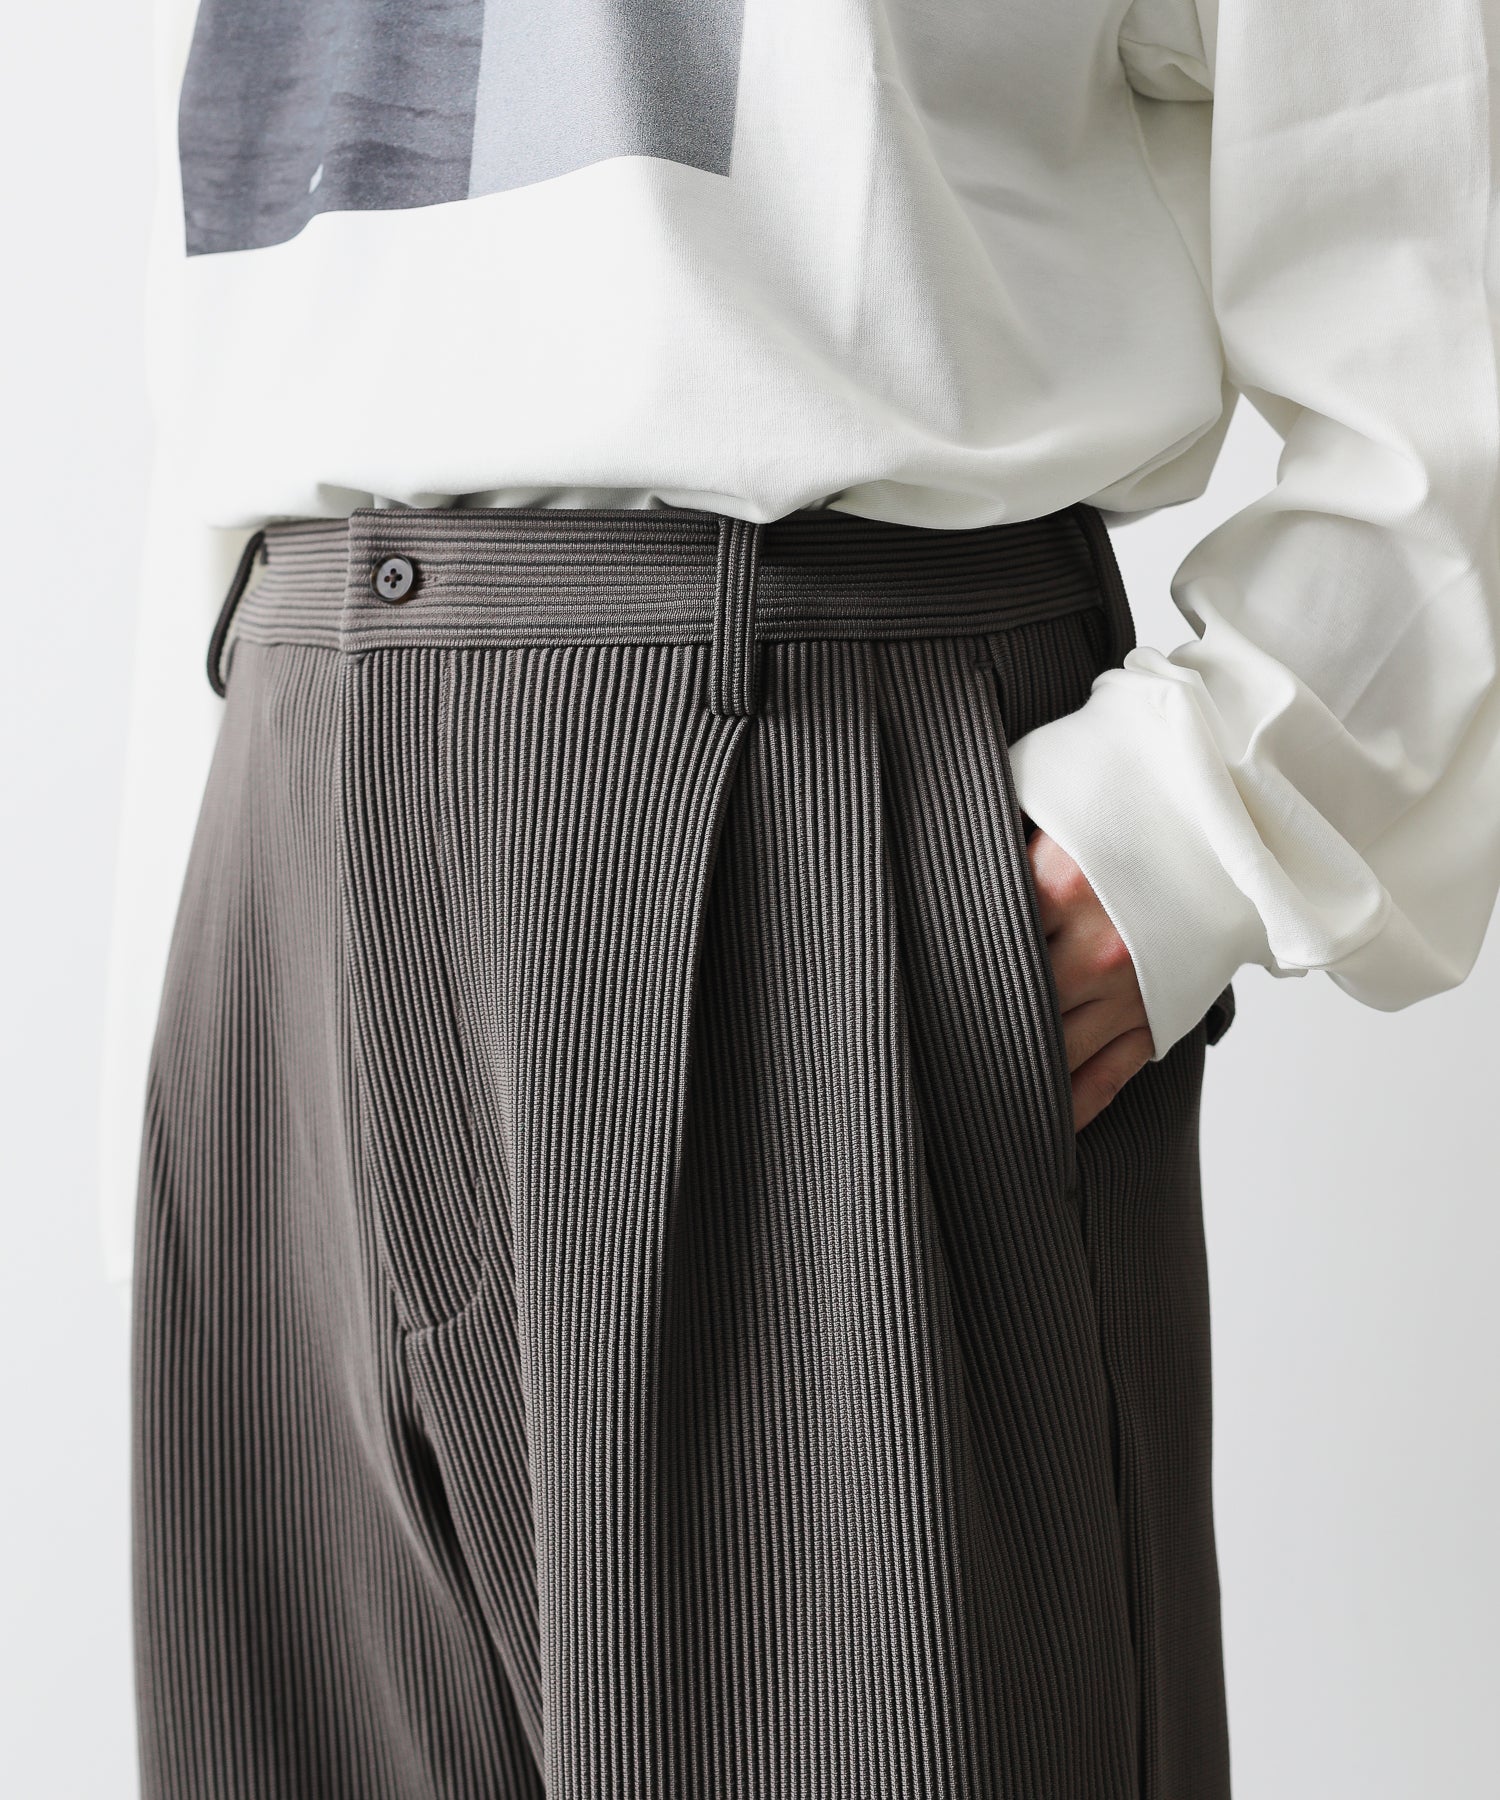 stein】GRADATION PLEATS WIDE TROUSERS | 公式通販サイト session